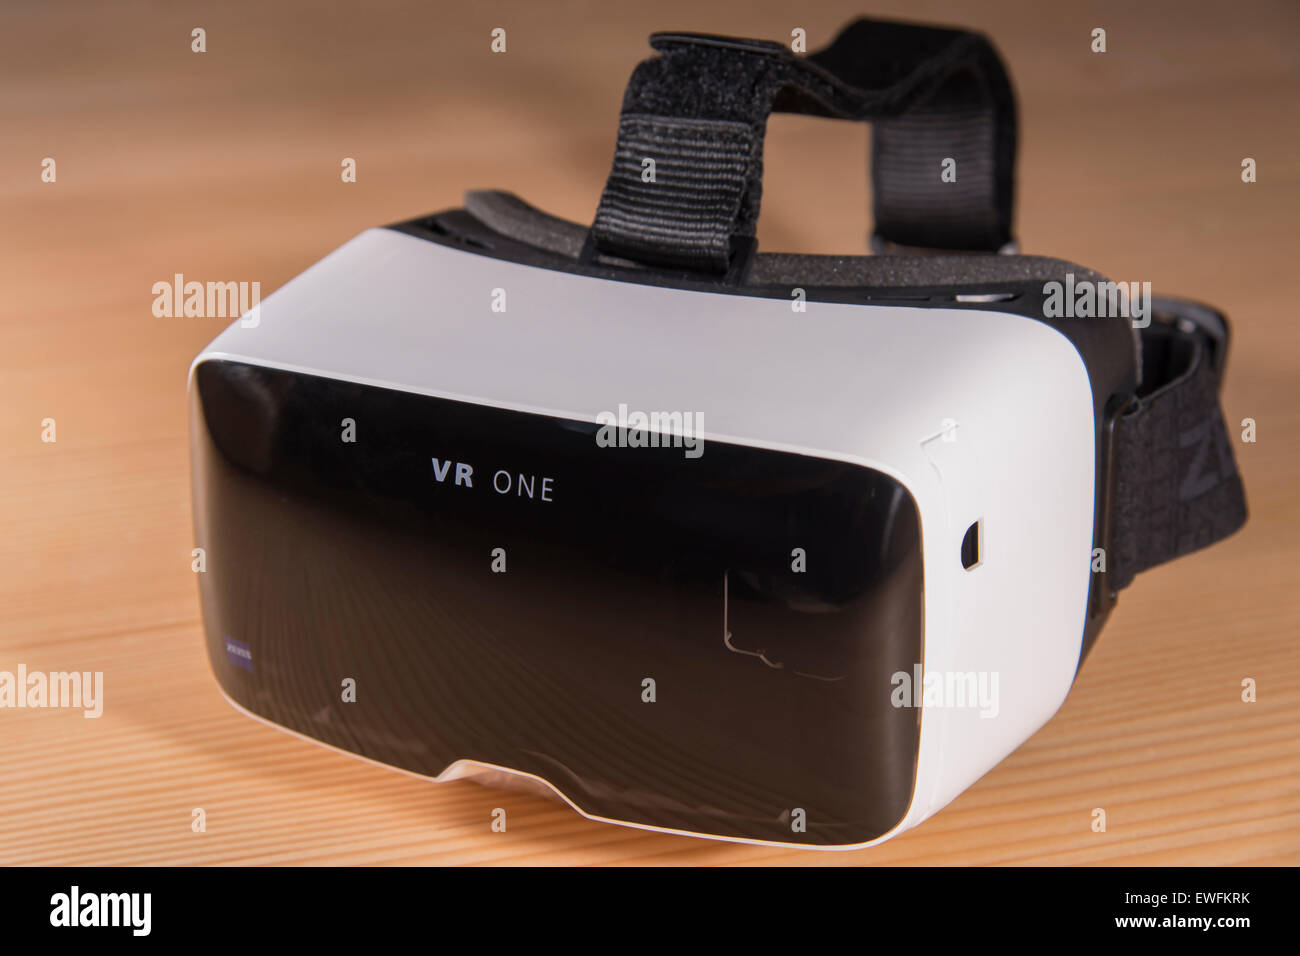 ZEISS VR ONE virtual reality VR plastic goggles with bracket for Samsung  Galaxy S5 Android smartphone Stock Photo - Alamy